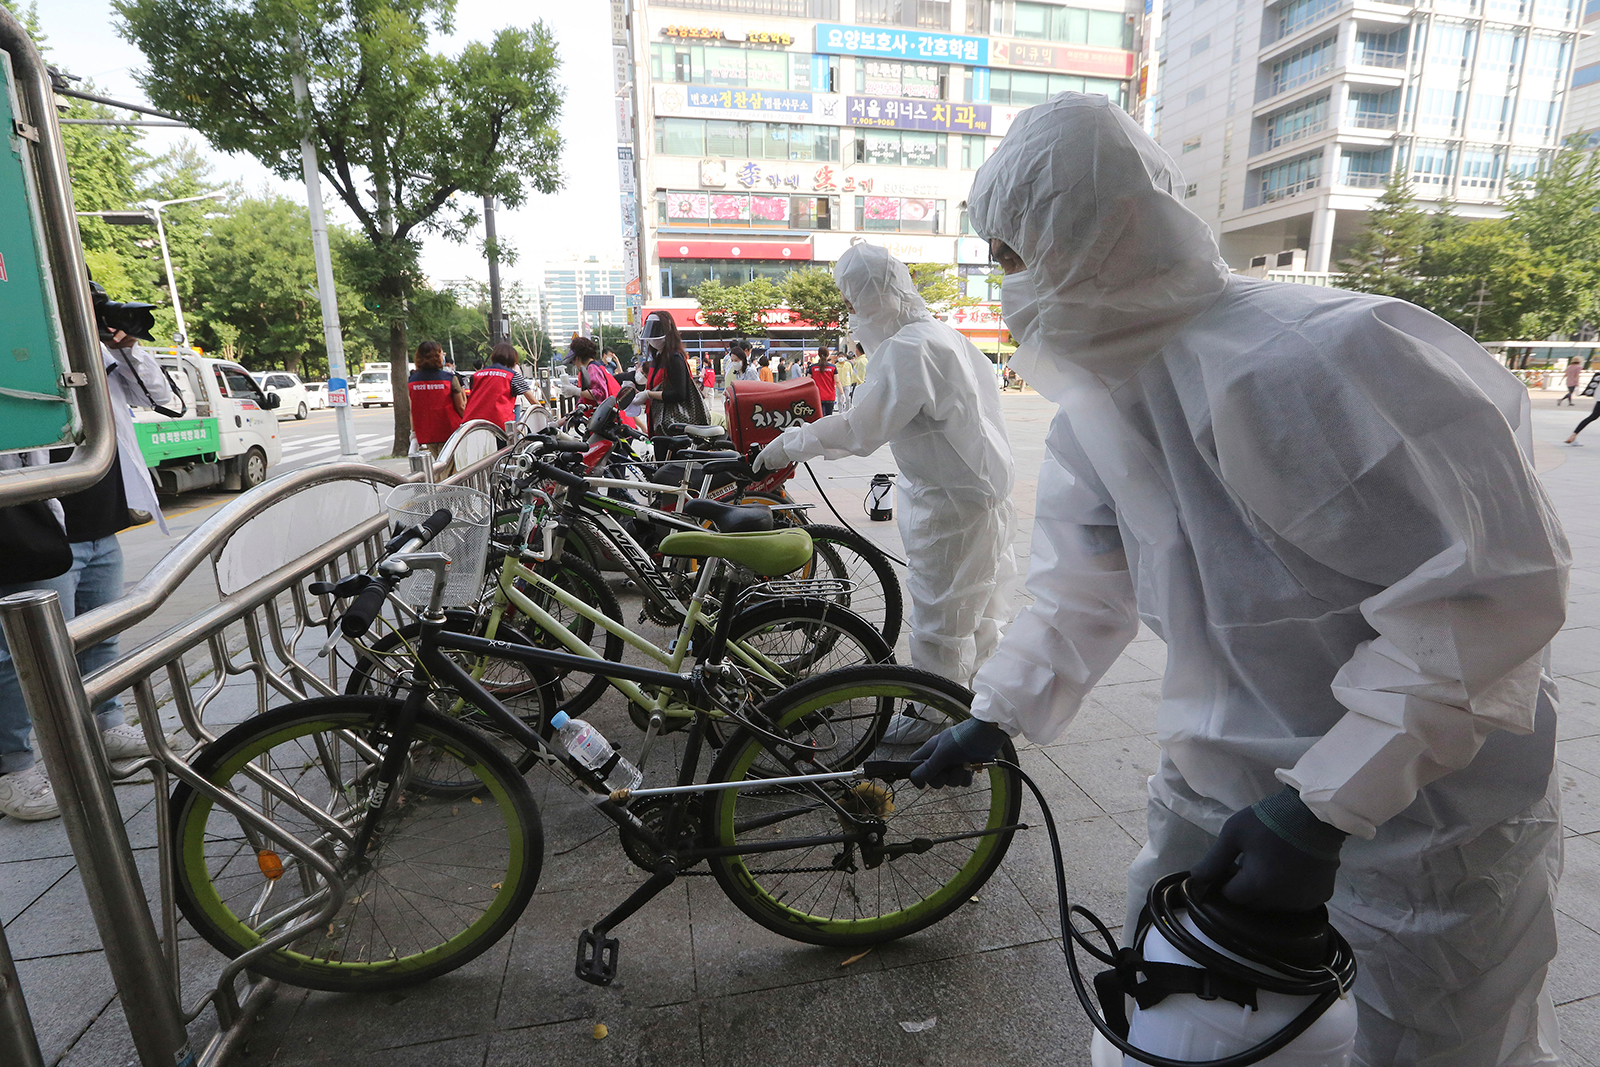 Workers and volunteers disinfect as a precaution against the coronavirus on a street in Goyang, South Korea, on August 25.